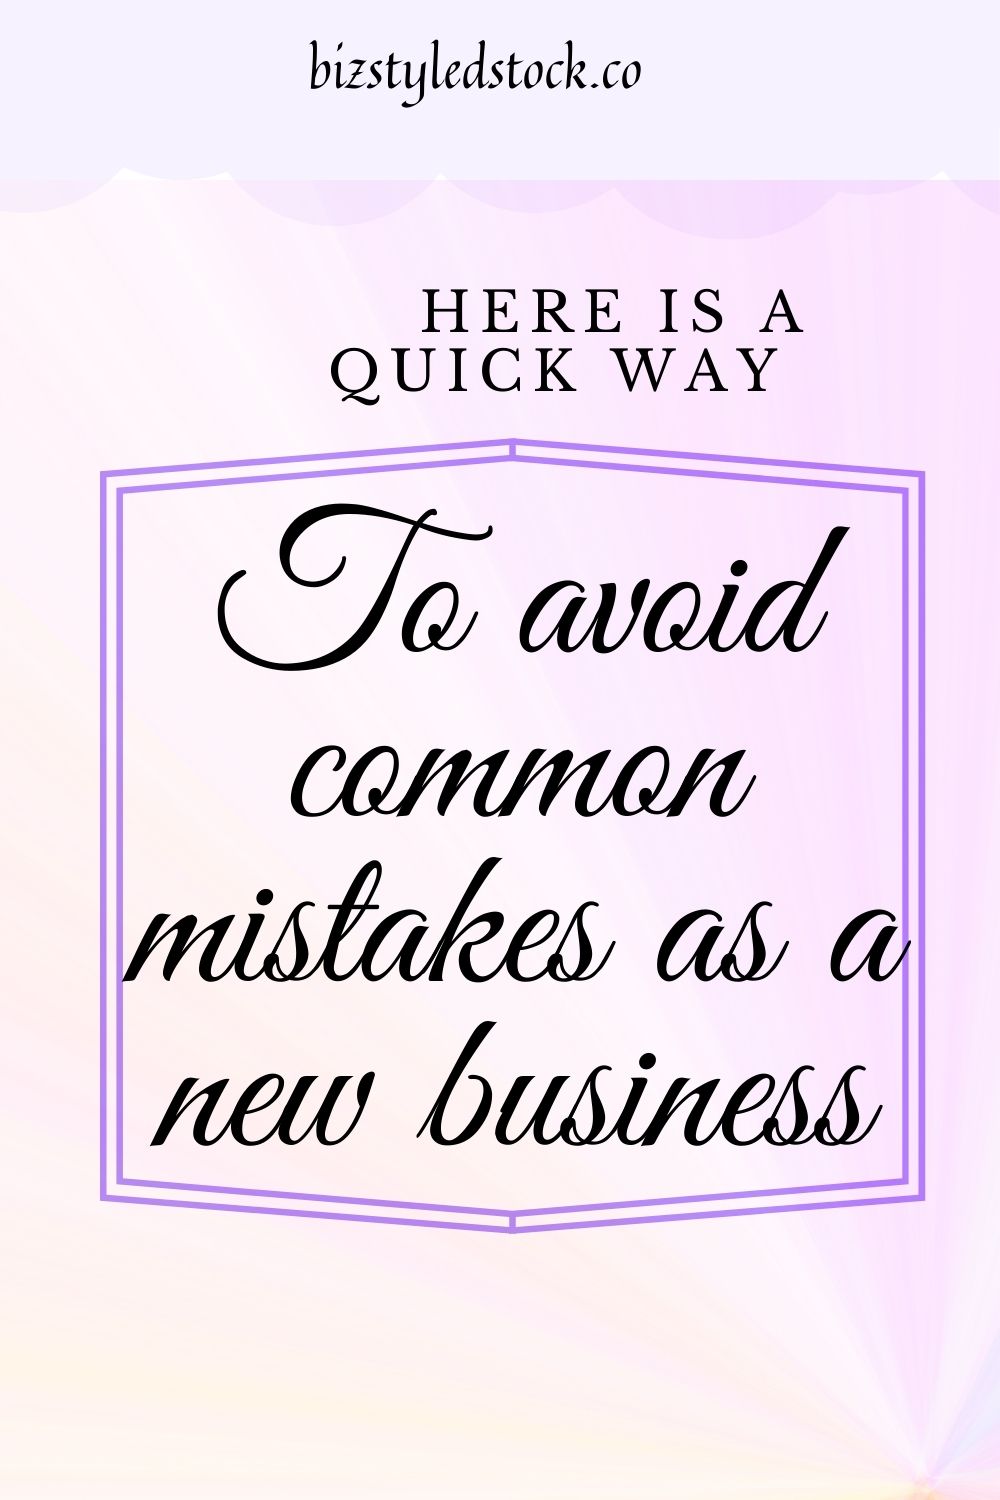 Here is a quick way to avoid common mistakes as a new business #businessmistakes small business mistakes to avoid  when starting a business